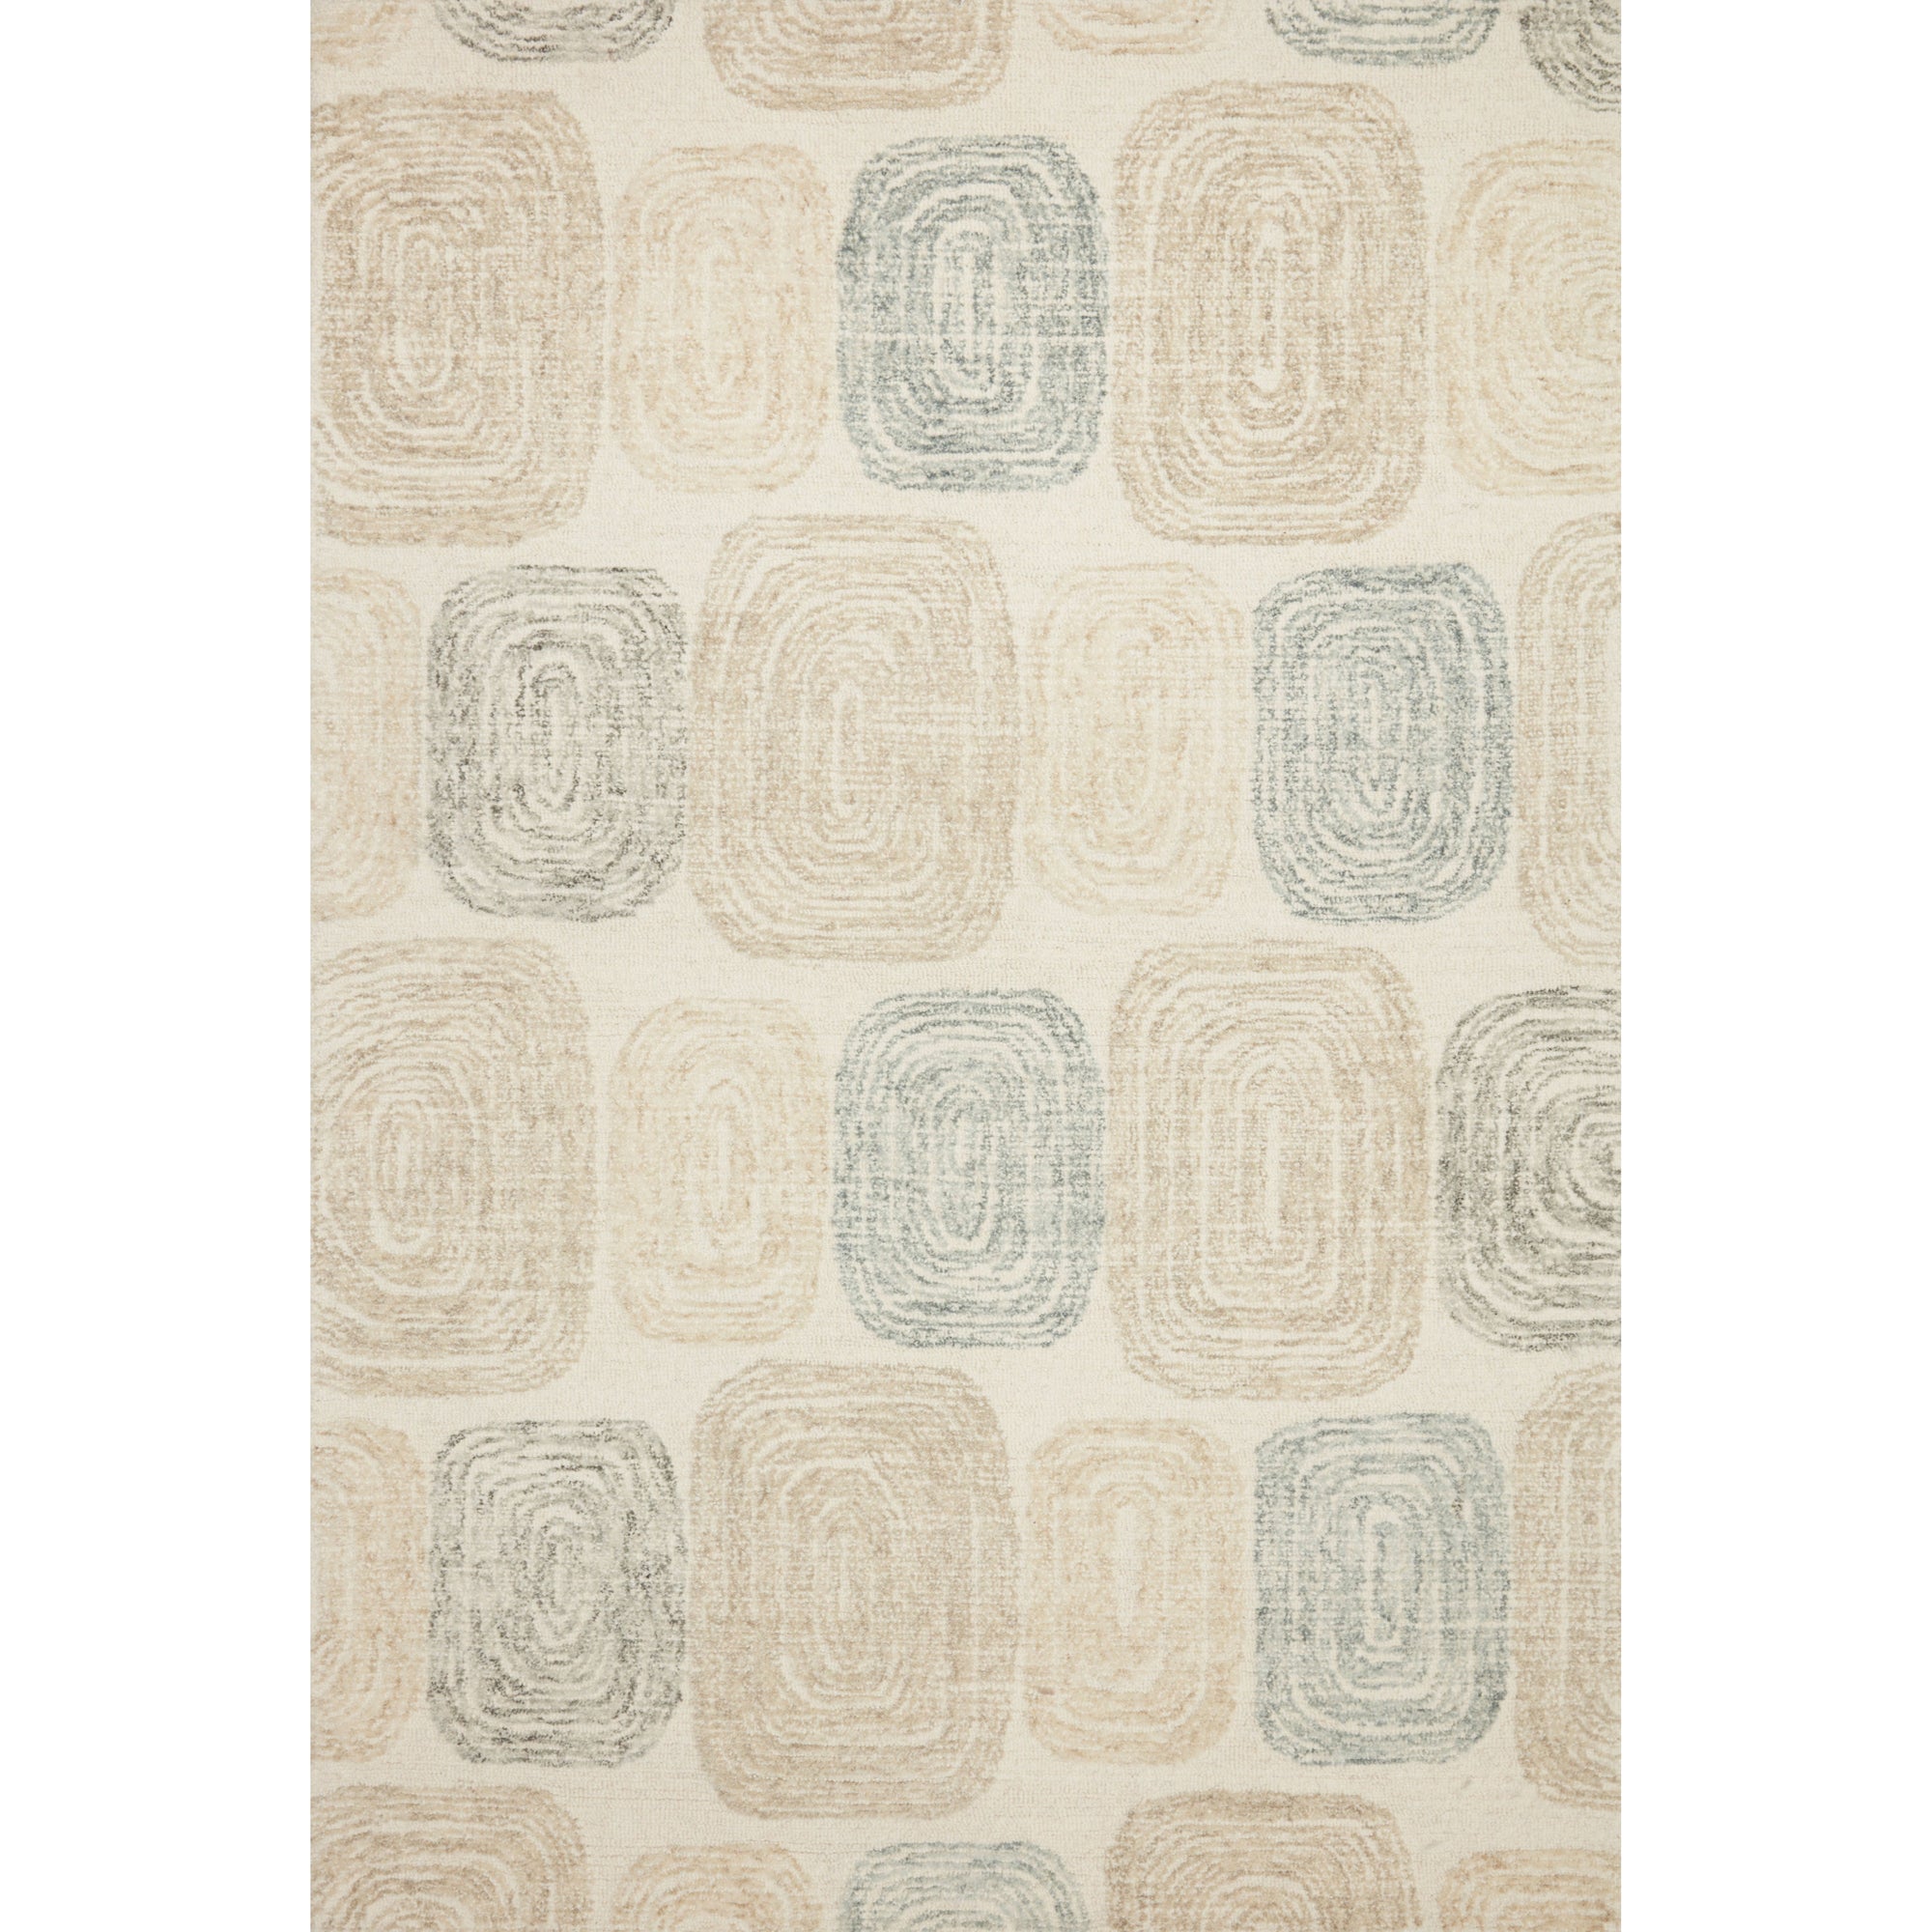 Rugs by Roo Loloi Milo Teal Neutral Area Rug in size 18" x 18" Sample